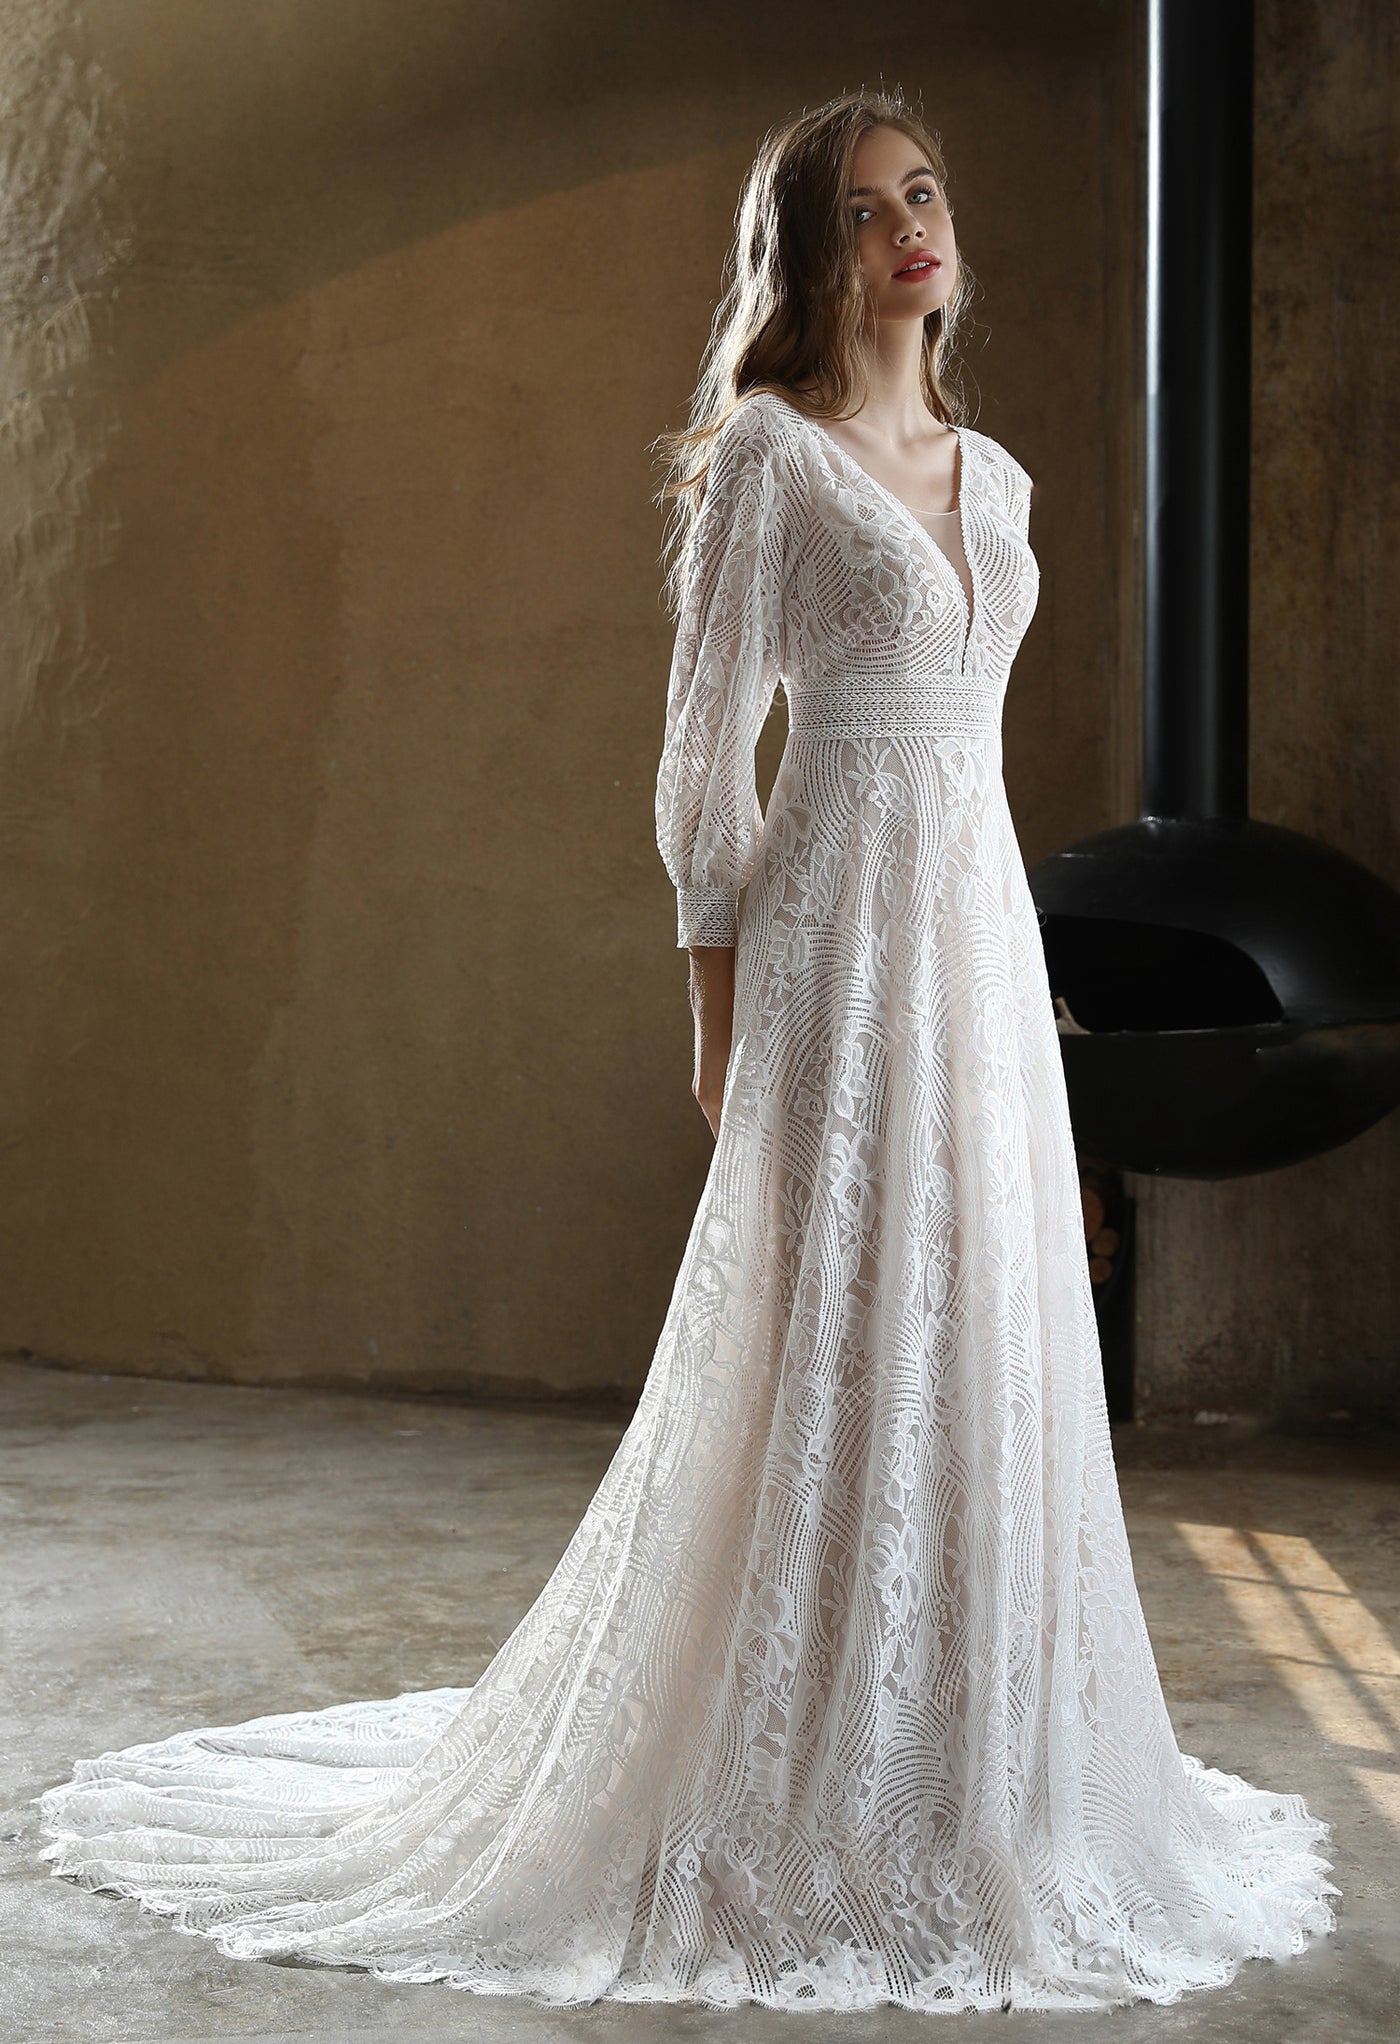 A woman in a white Bergamot Bridal Plunging V-neck Lace Long Sleeve Bohemian Wedding Gown is standing in a room.